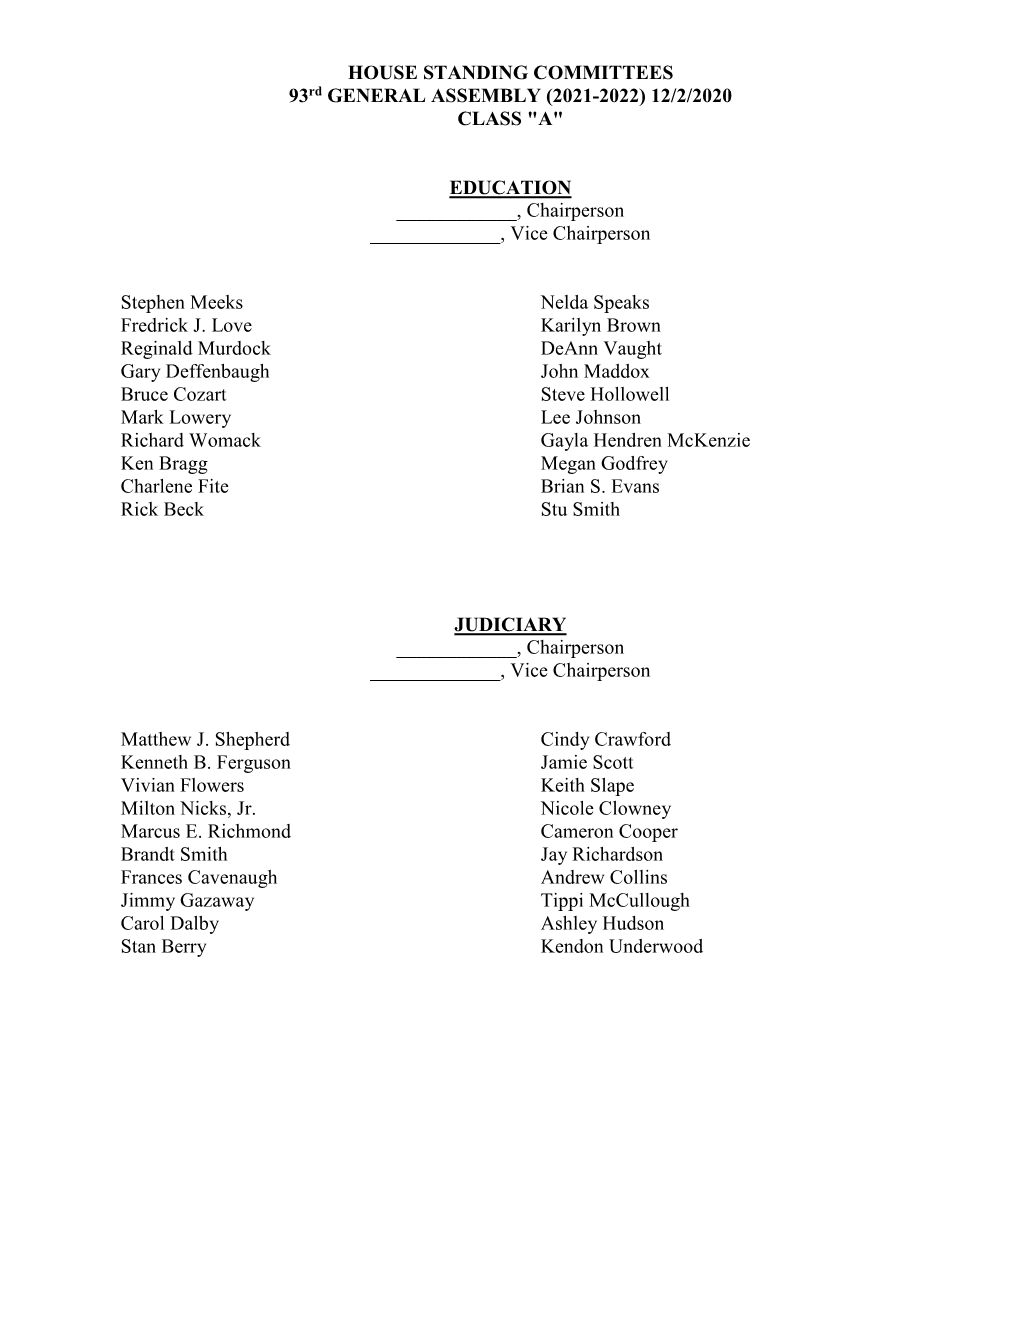 AR House 2021 Committees Roster